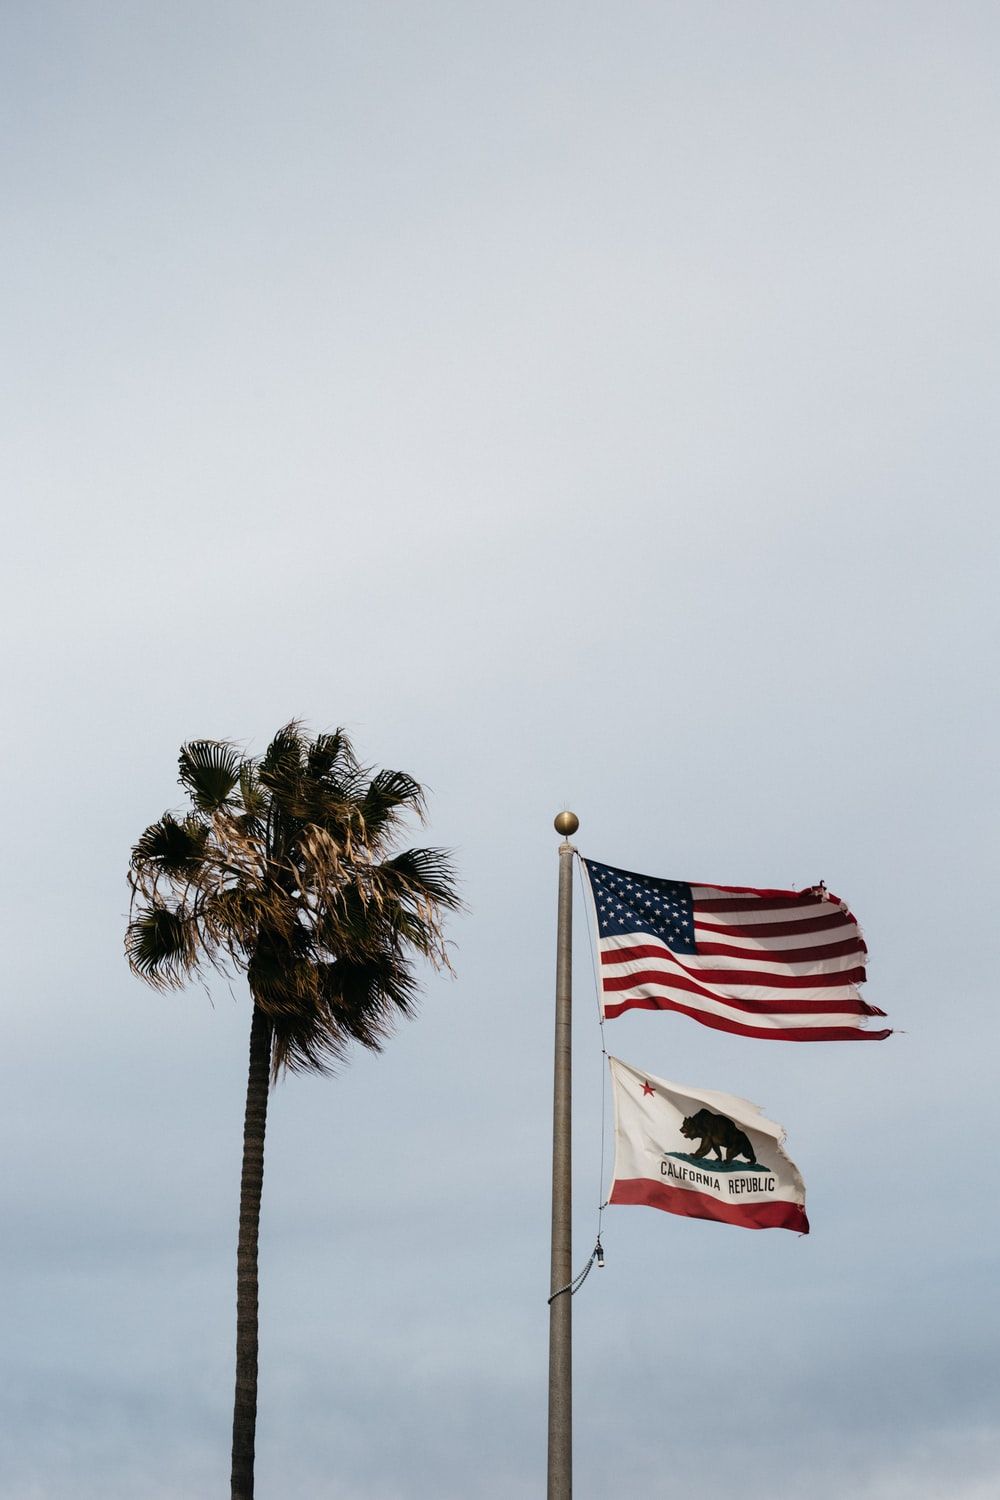 California Flag Picture. Download Free Image